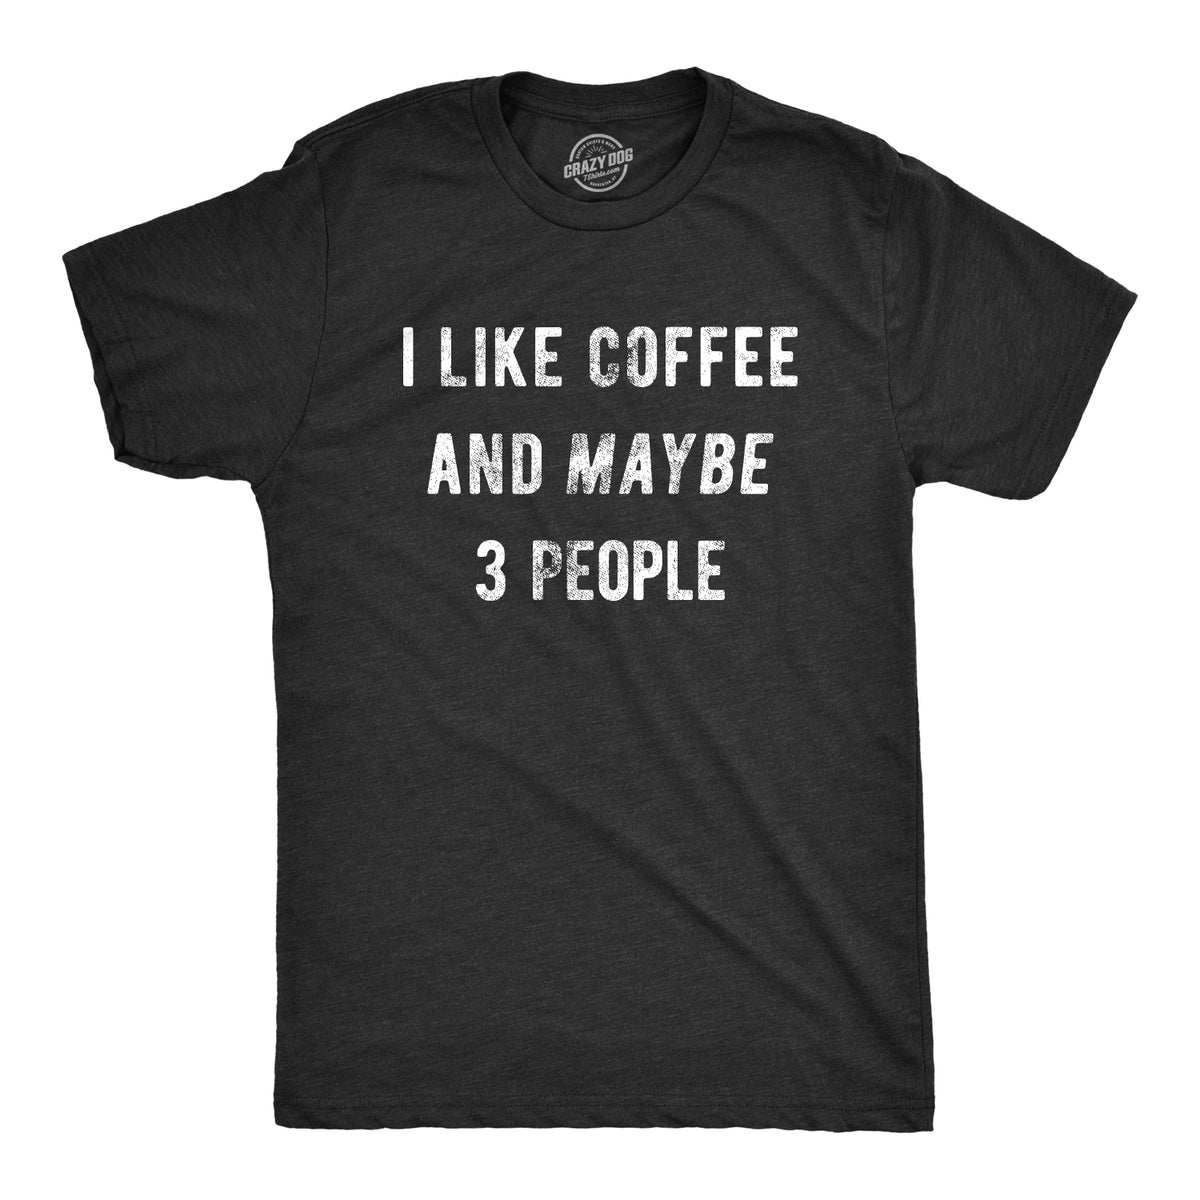 Funny Heather Black I Like Coffee And Maybe 3 People Mens T Shirt Nerdy Coffee Introvert Tee